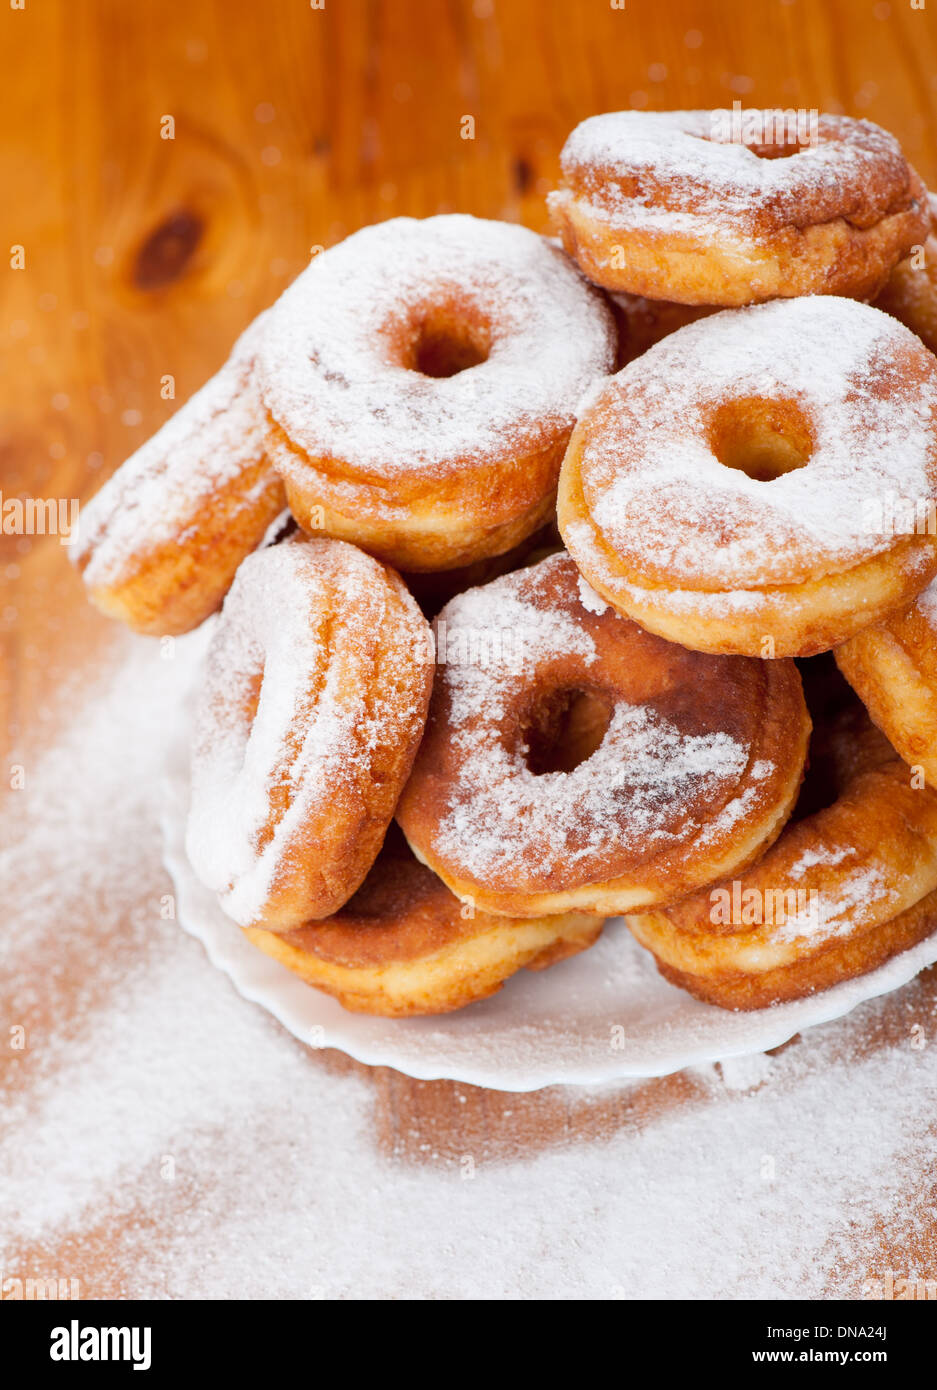 stack of sweet and caloric donuts with holes and powdered sugar Stock Photo